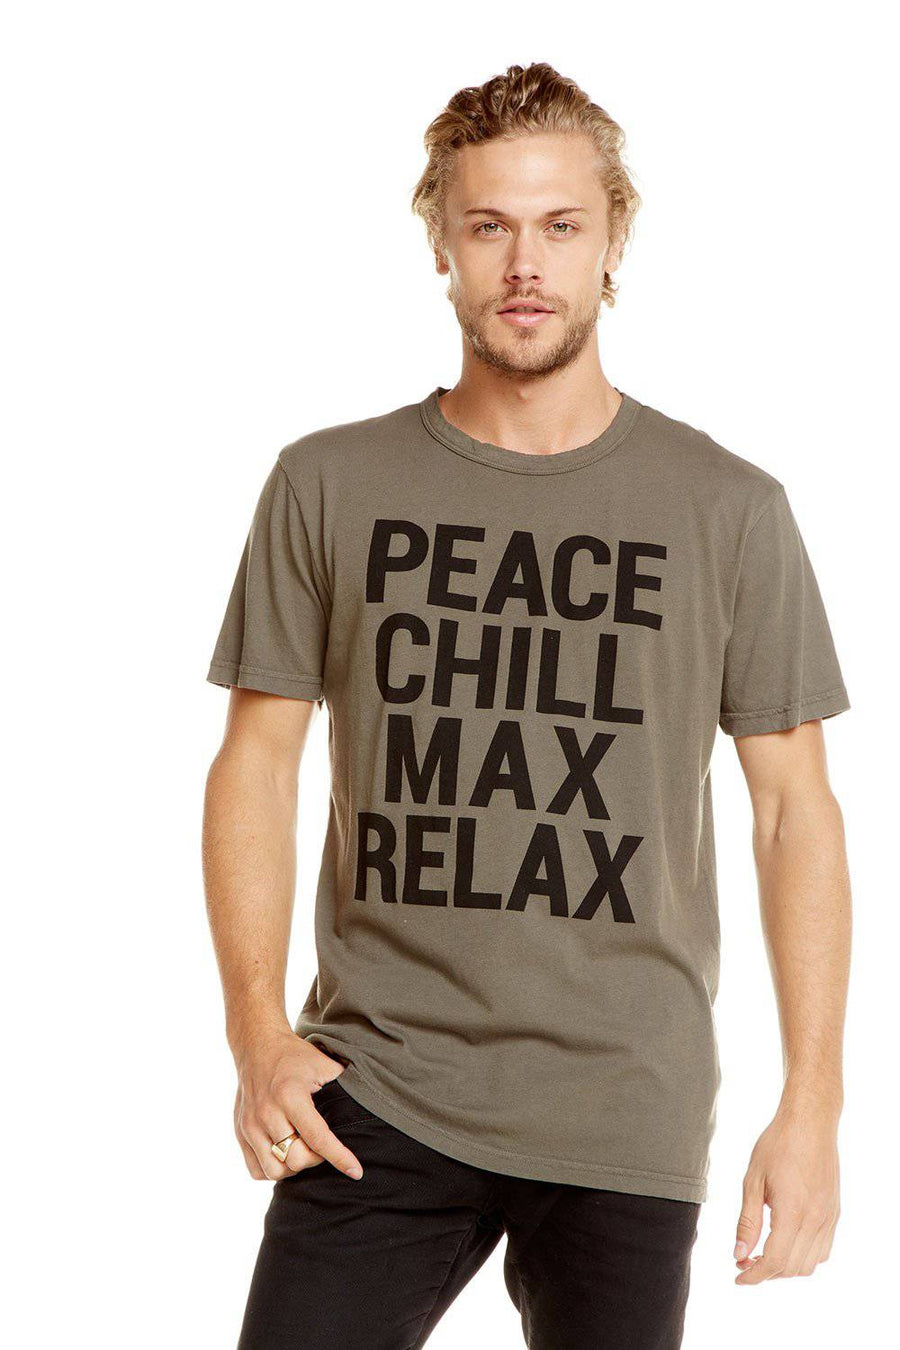 PEACE CHILL MENS chaserbrand